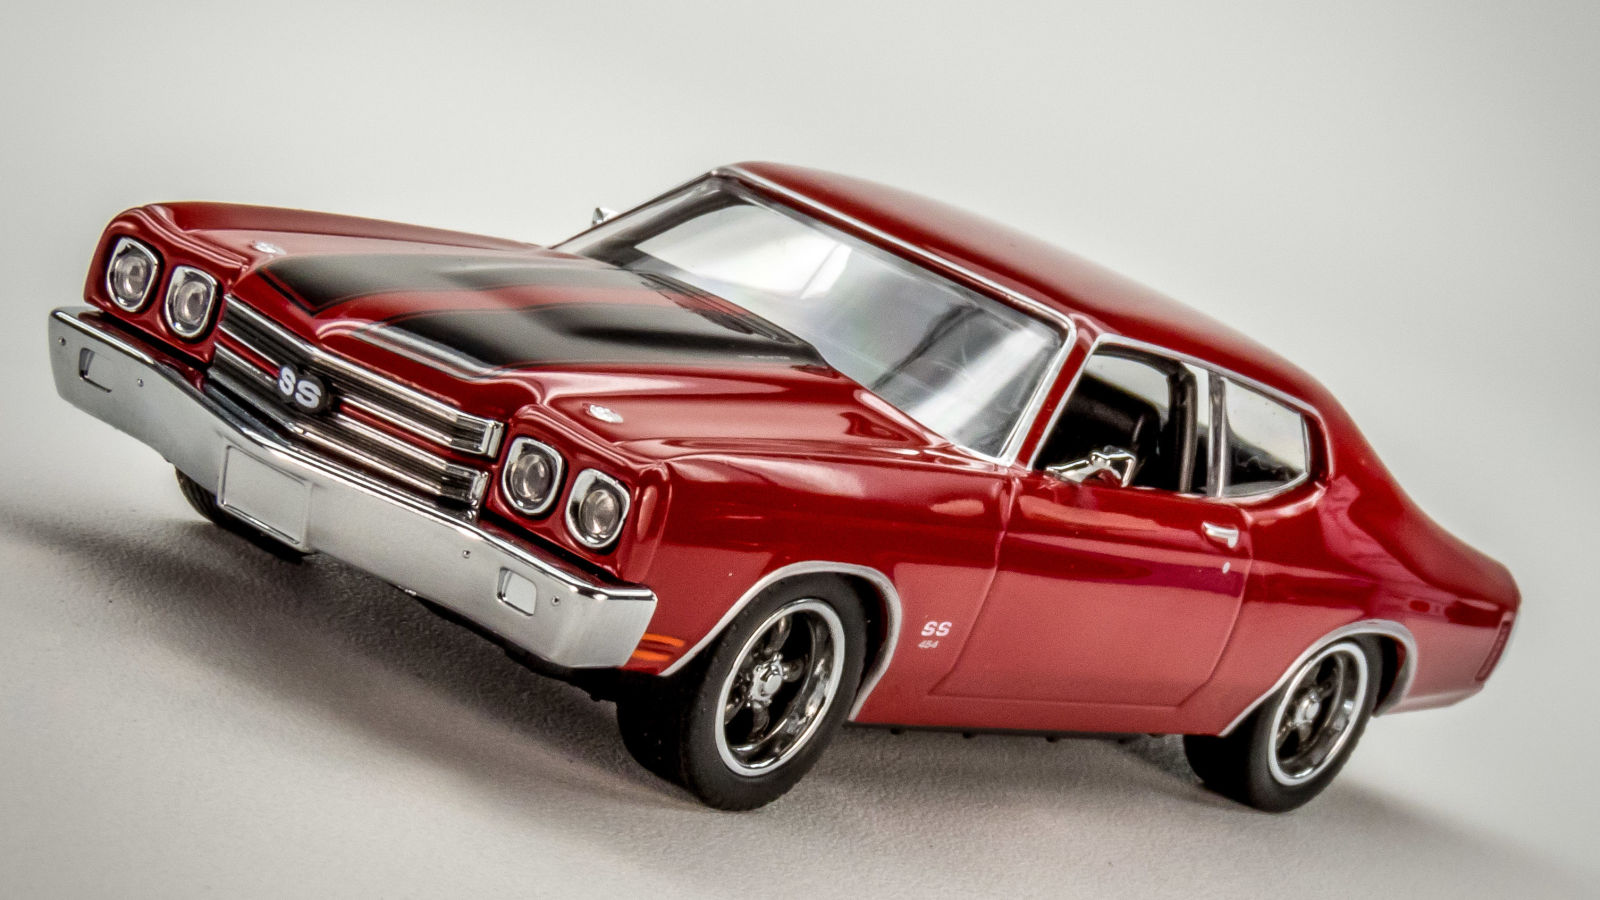 Illustration for article titled Video Review: GreenLight 70 Chevelle SS Fast  Furious 1:43 Scale